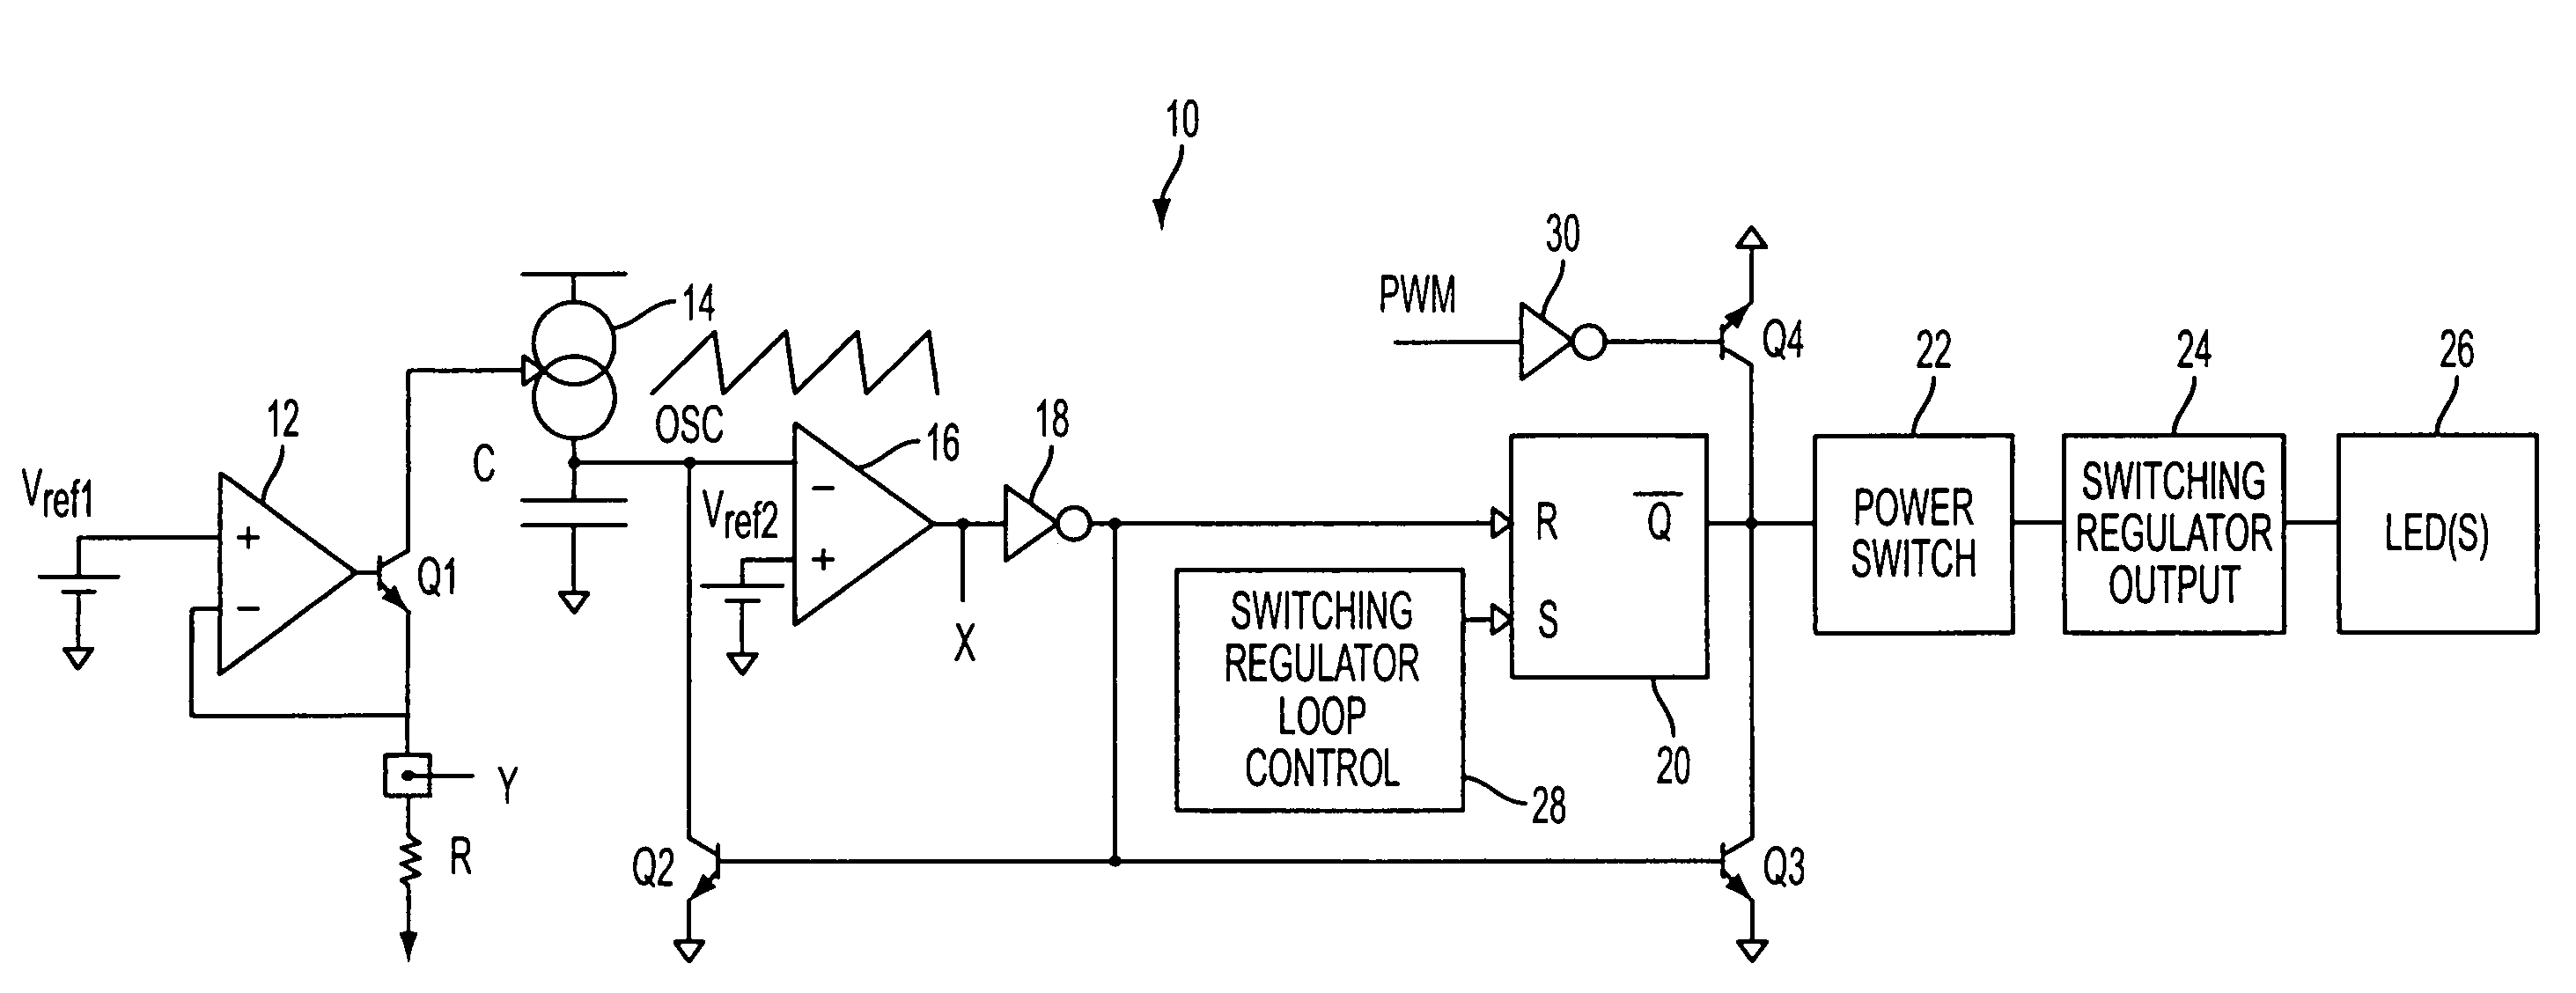 LED dimming control technique for increasing the maximum PWM dimming ratio and avoiding LED flicker